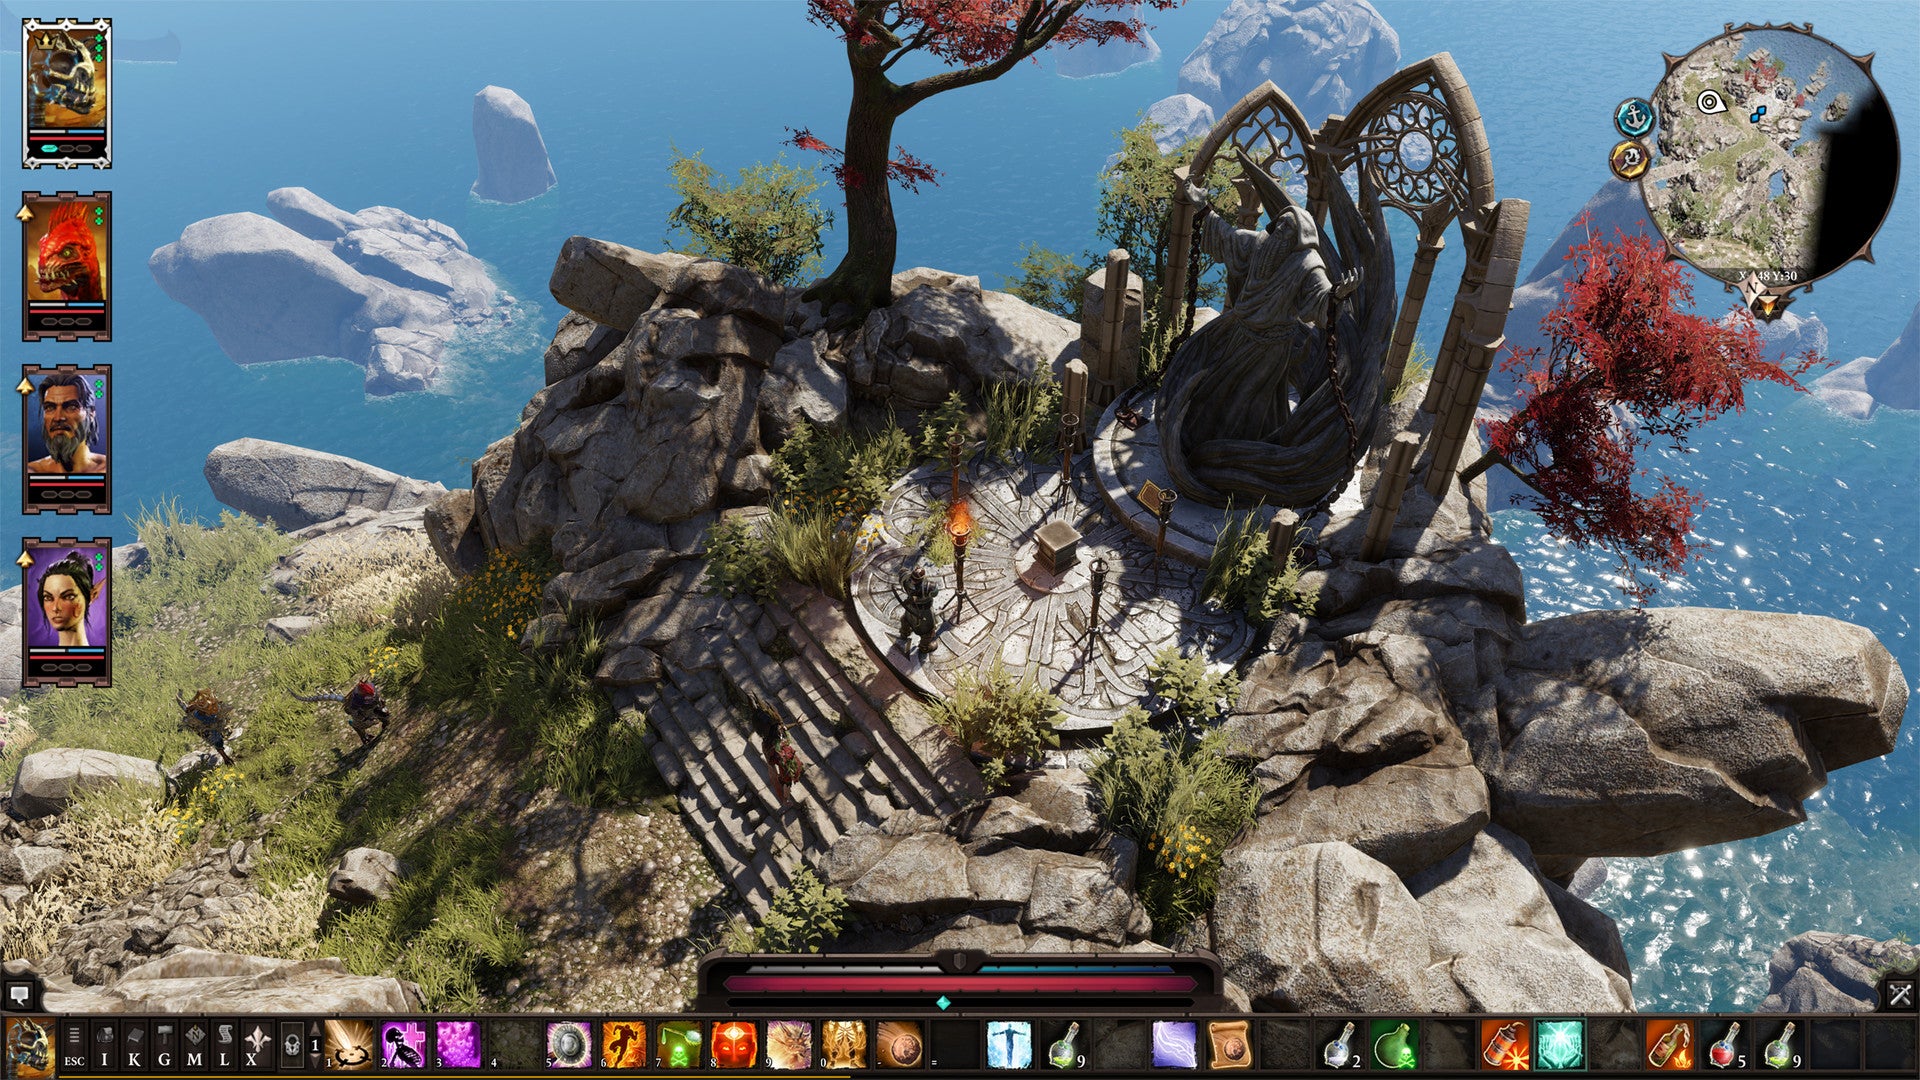 Screenshot from Divinity: Original Sin 2 video game showing gameplay interface.